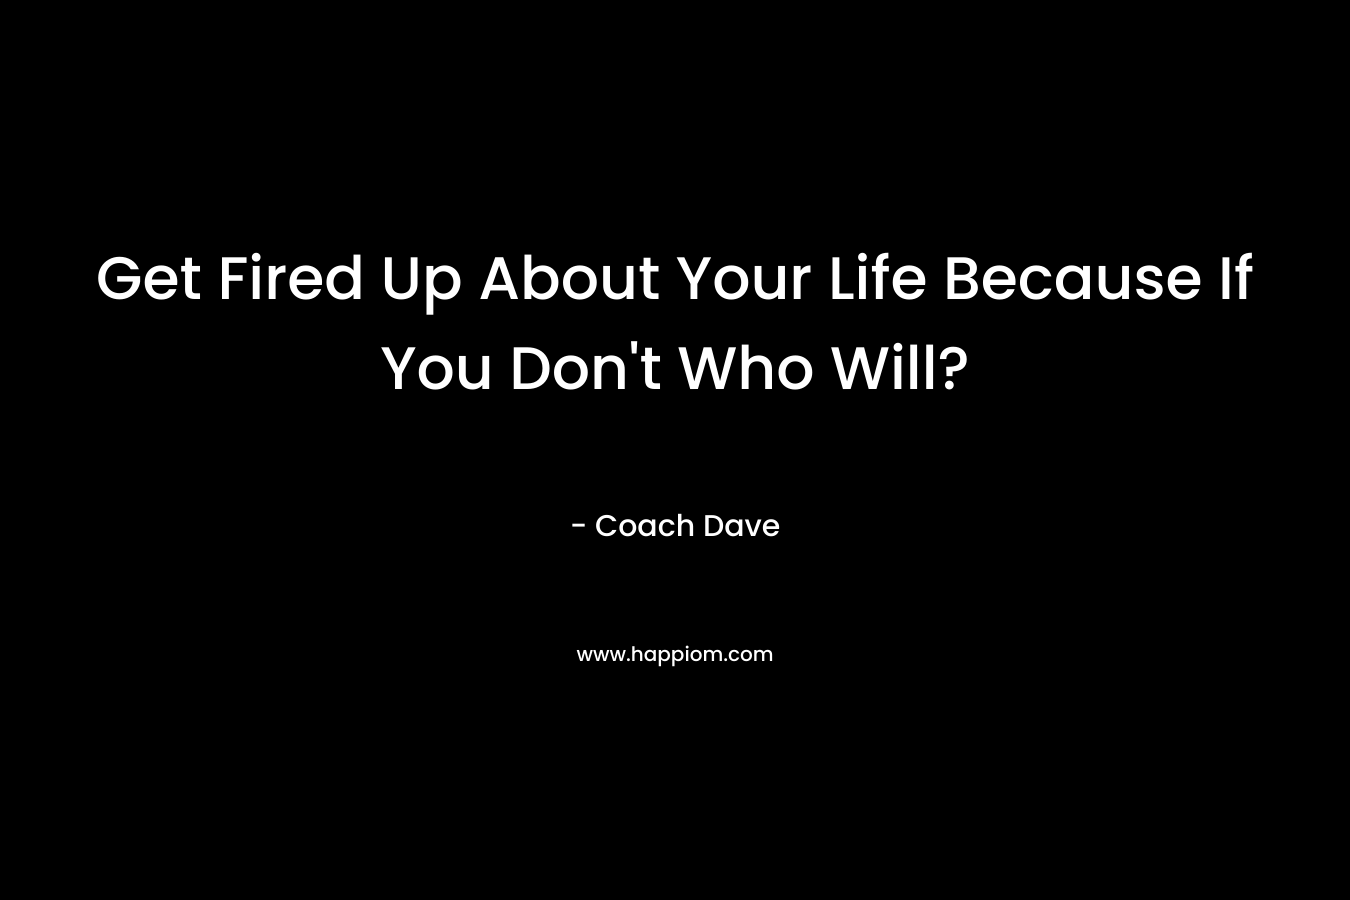 Get Fired Up About Your Life Because If You Don’t Who Will? – Coach Dave